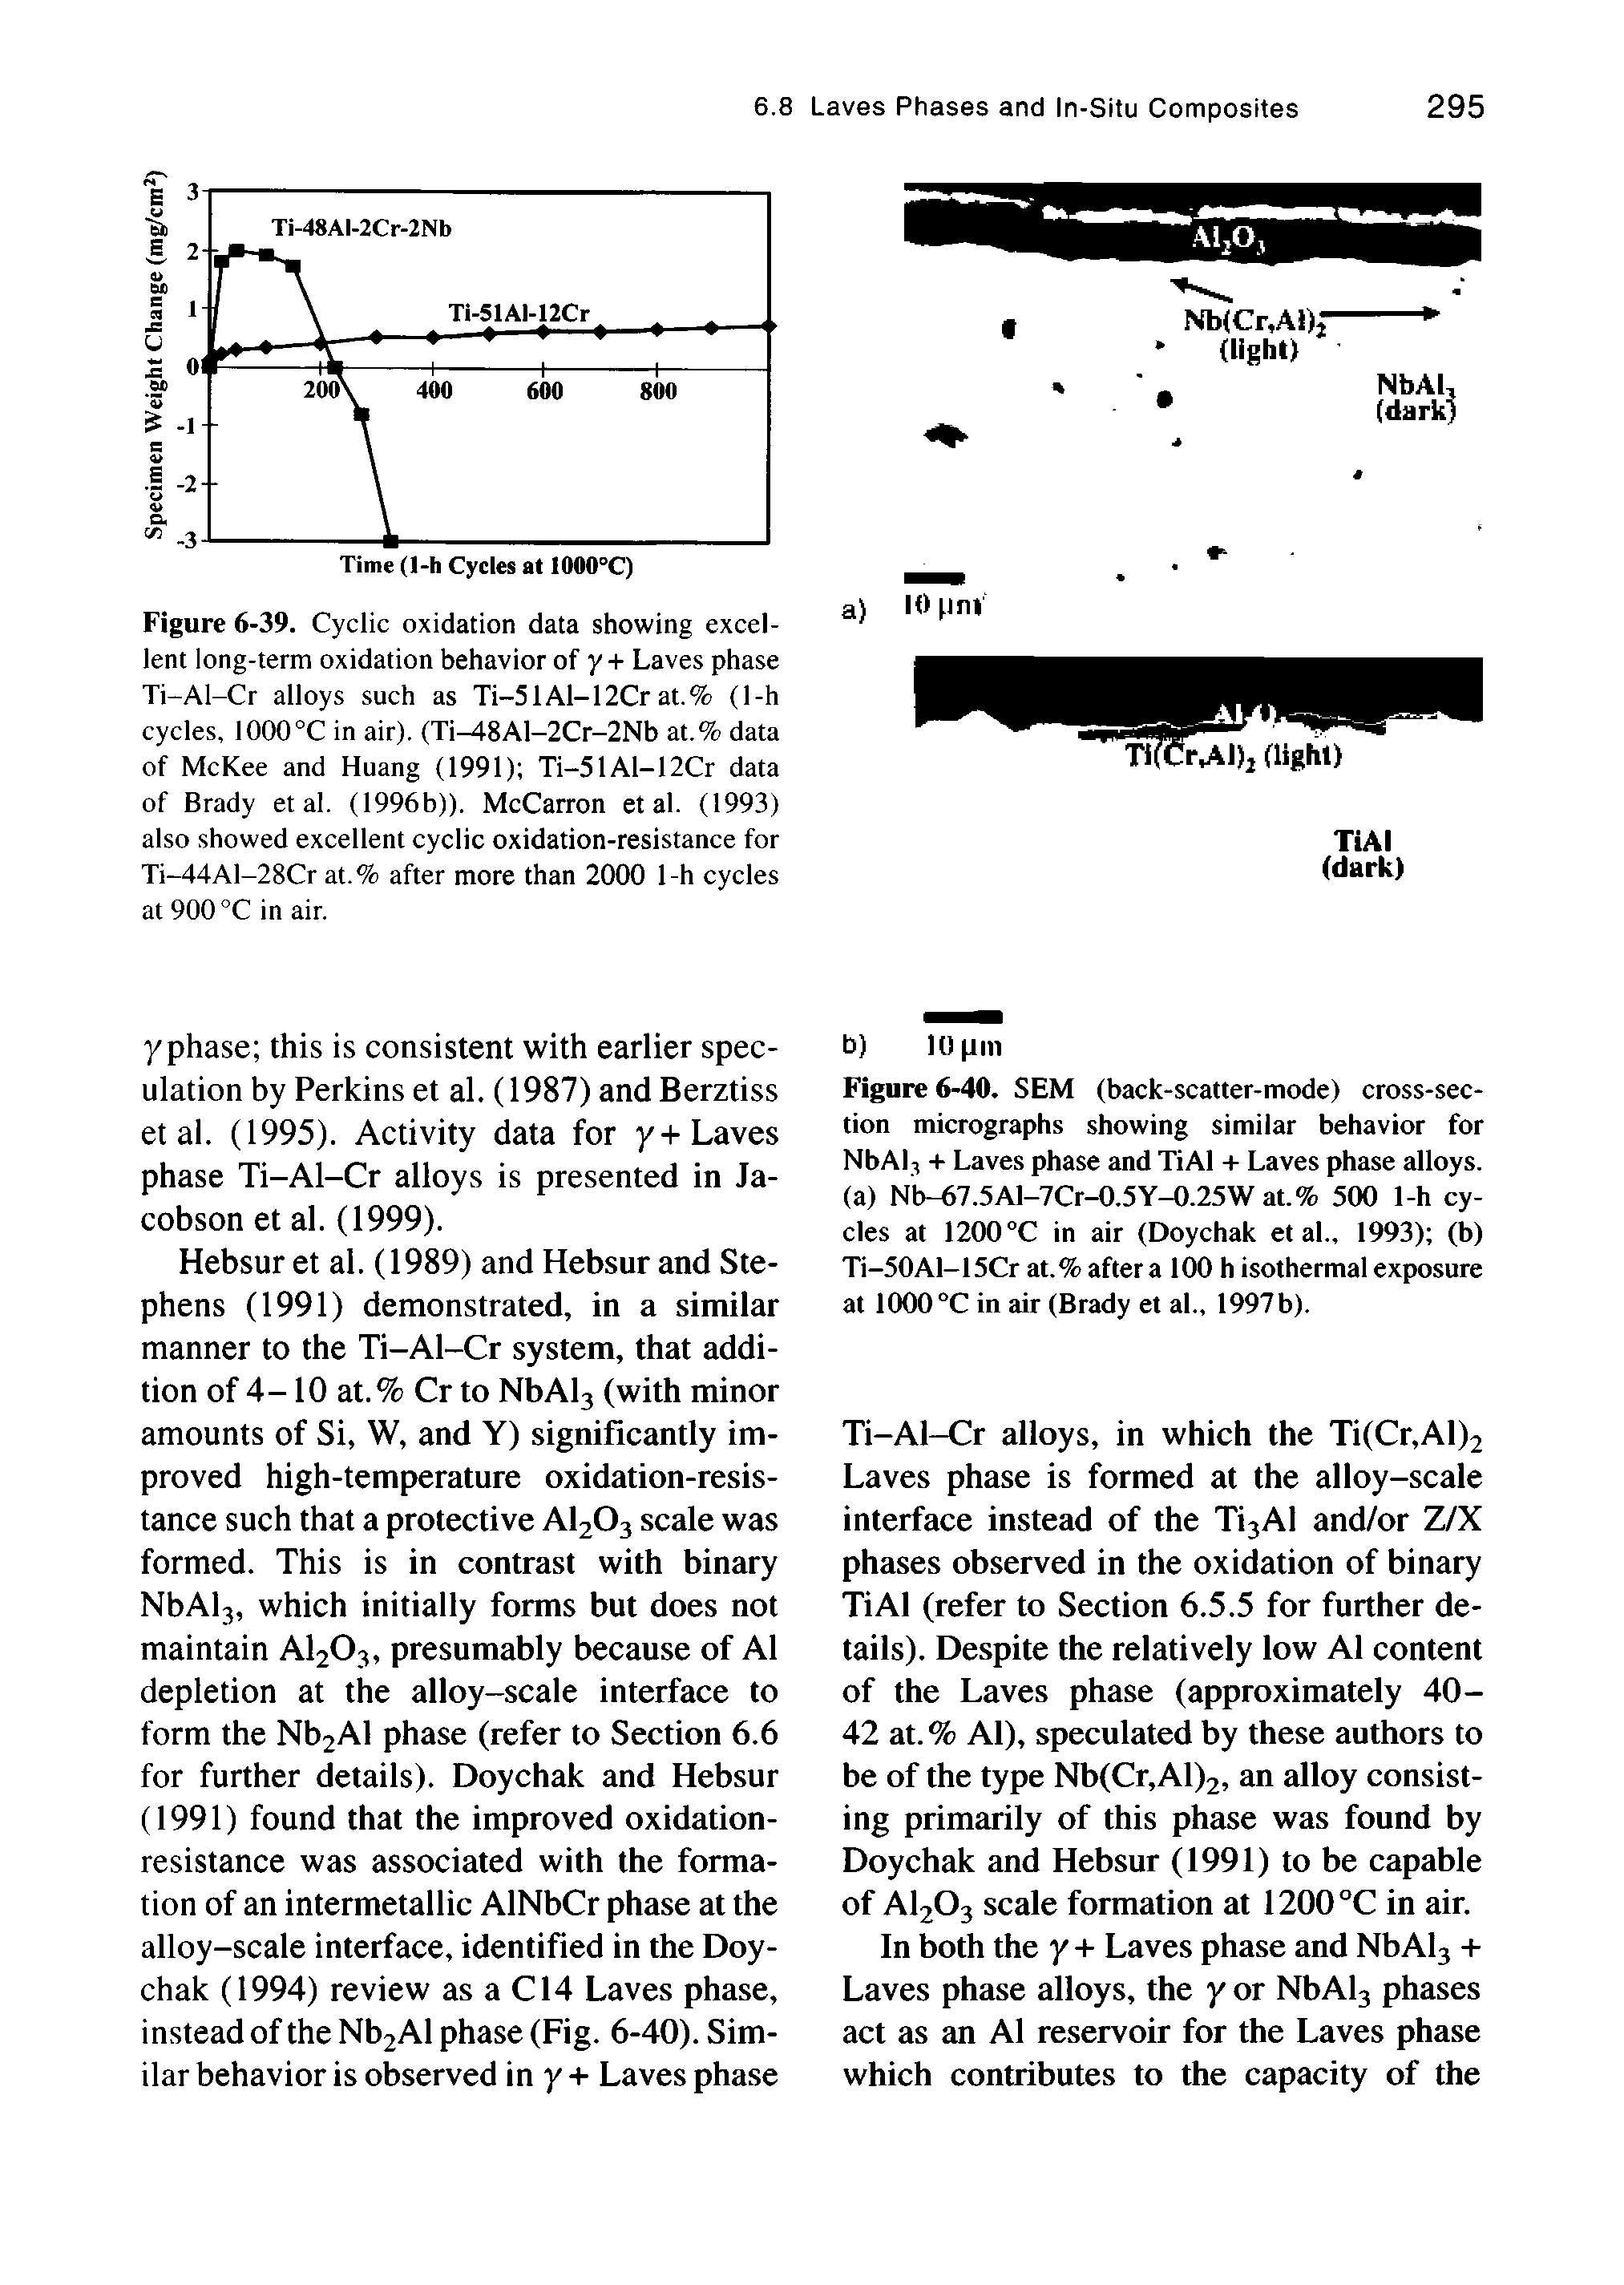 Figure 6-40. SEM (back-scatter-mode) cross-section micrographs showing similar behavior for NbAl, + Laves phase and TiAl + Laves phase alloys, (a) Nb-67.5Al-7Cr-0.5Y-0.25W at.% 500 1-h cycles at 1200°C in air (Doychak etal., 1993) (b) Ti-50Al-15Cr at.% aftera 100 h isothermal exposure at 1000 C in air (Brady et at, 1997b).